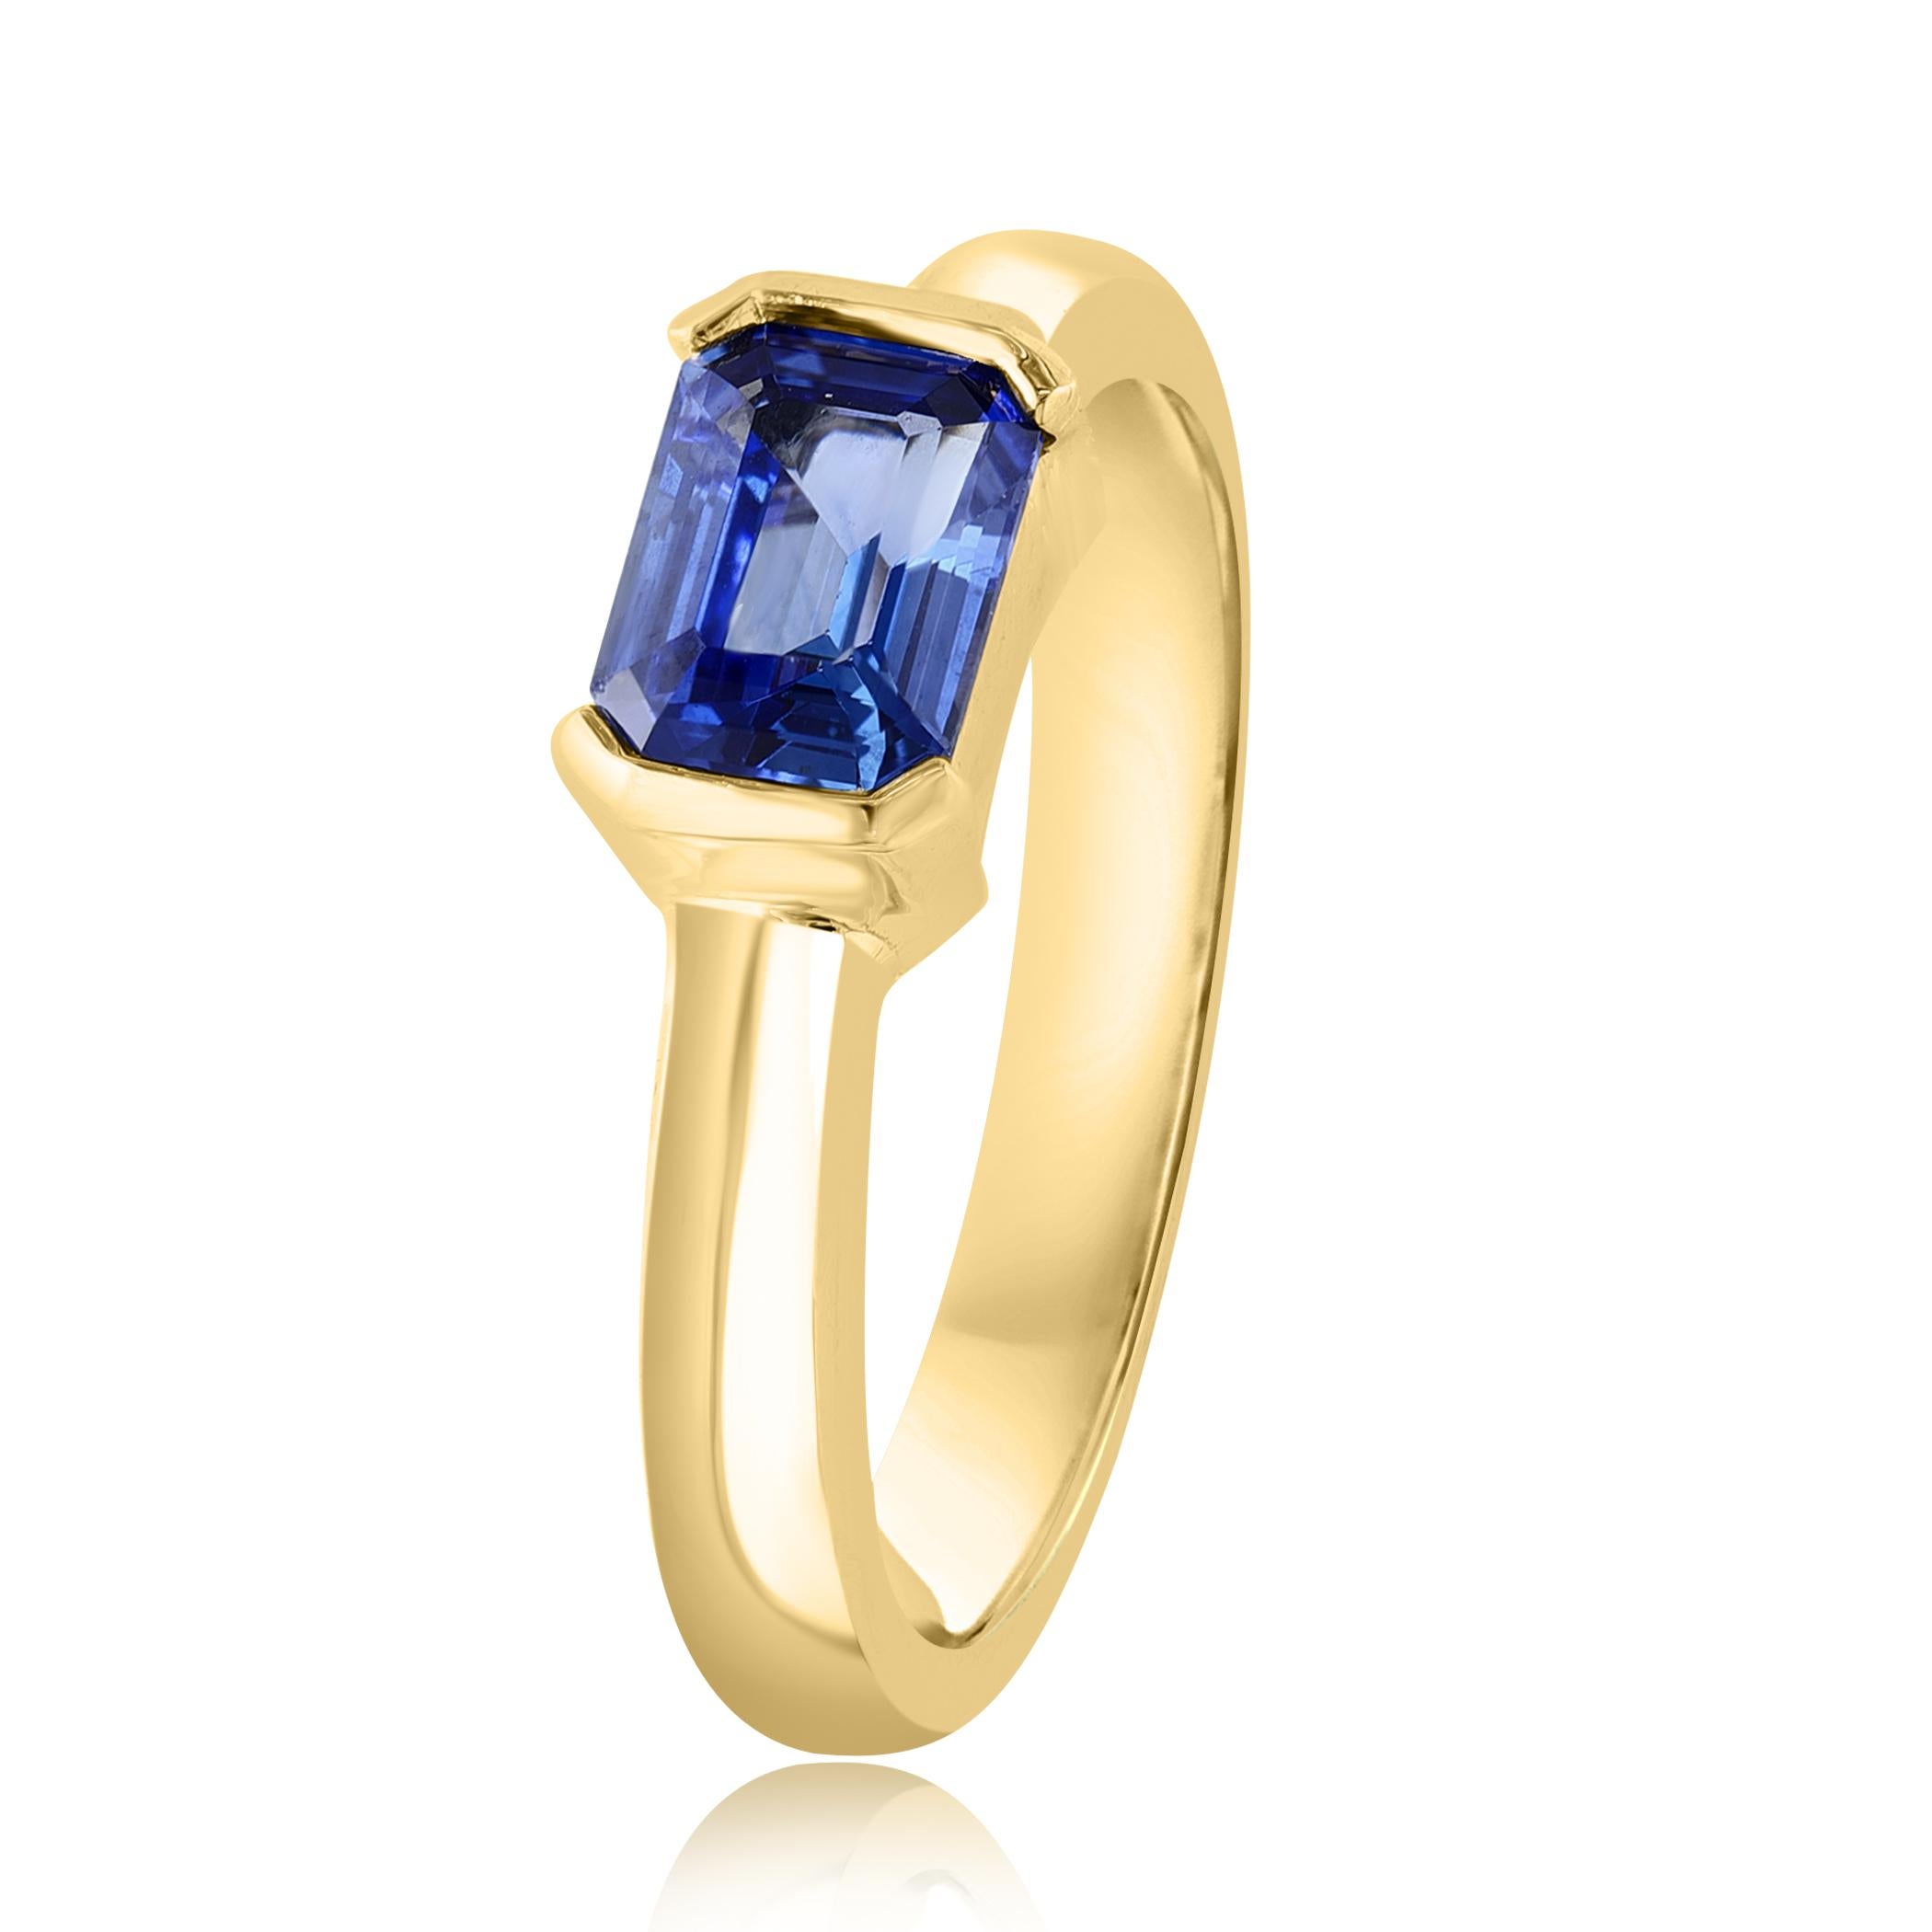 An elegant wedding band ring featuring an astonishing 1.06-carat emerald cut blue sapphire, set in a beautiful wide 14K yellow gold band. 

Style is available in different price ranges. Prices are based on your selection. Don't hesitate to get in